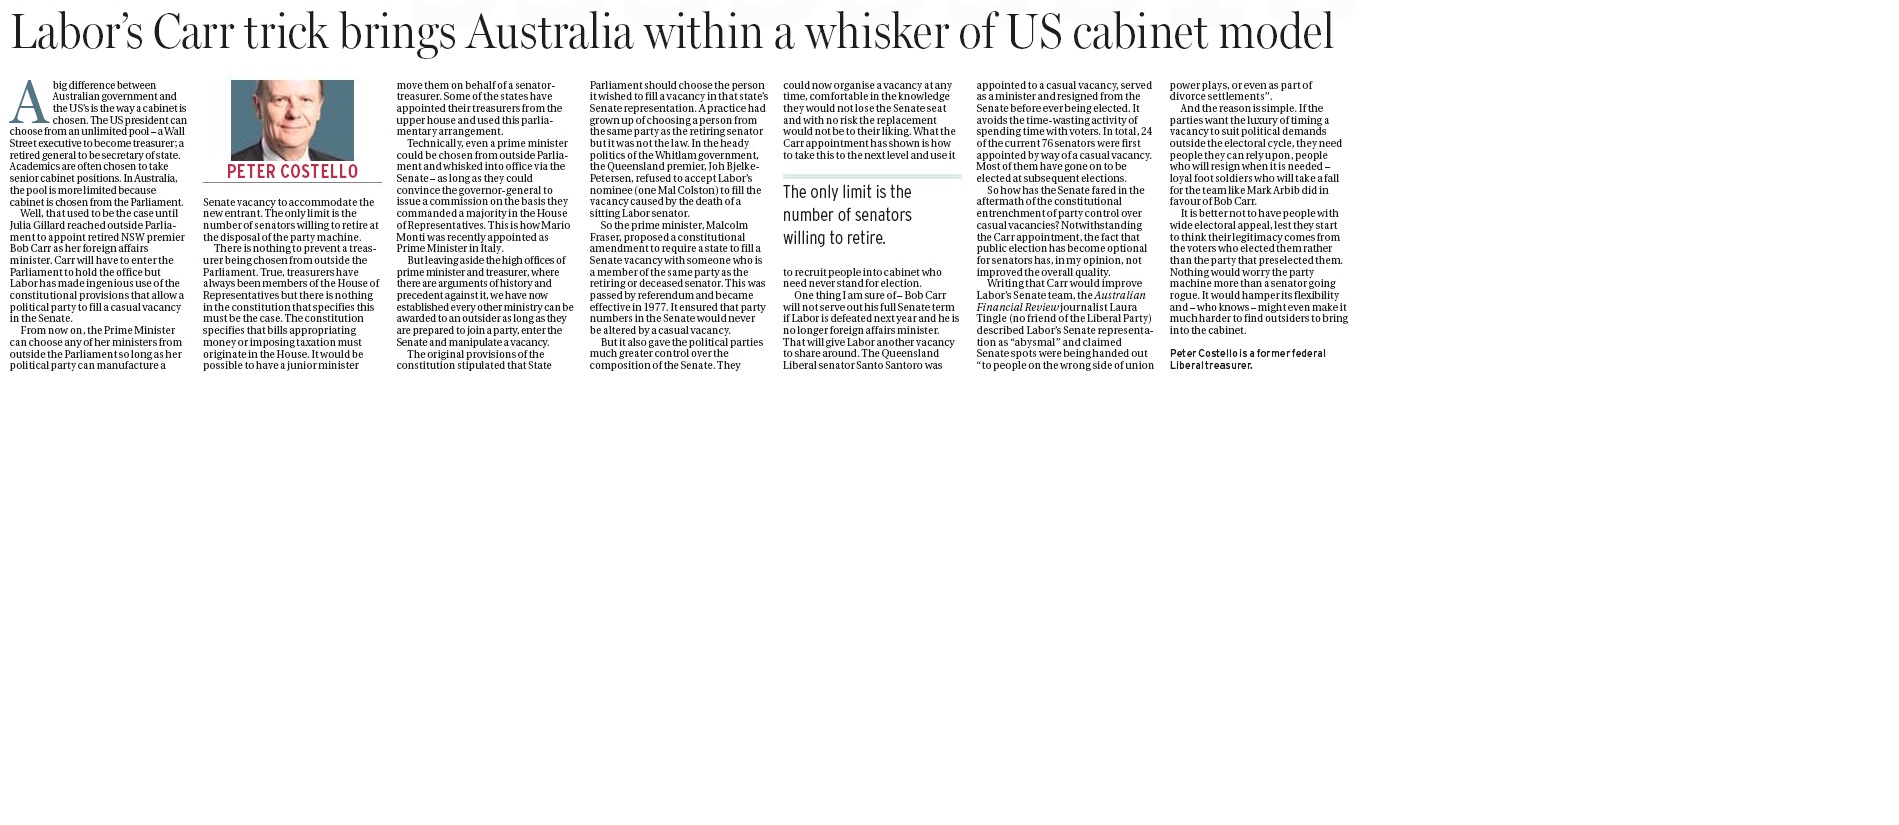 smh_-_labors_carr_trick_brings_australia_within_a_whisker_of_us_cabinet_model_-_14_march_2012jpg